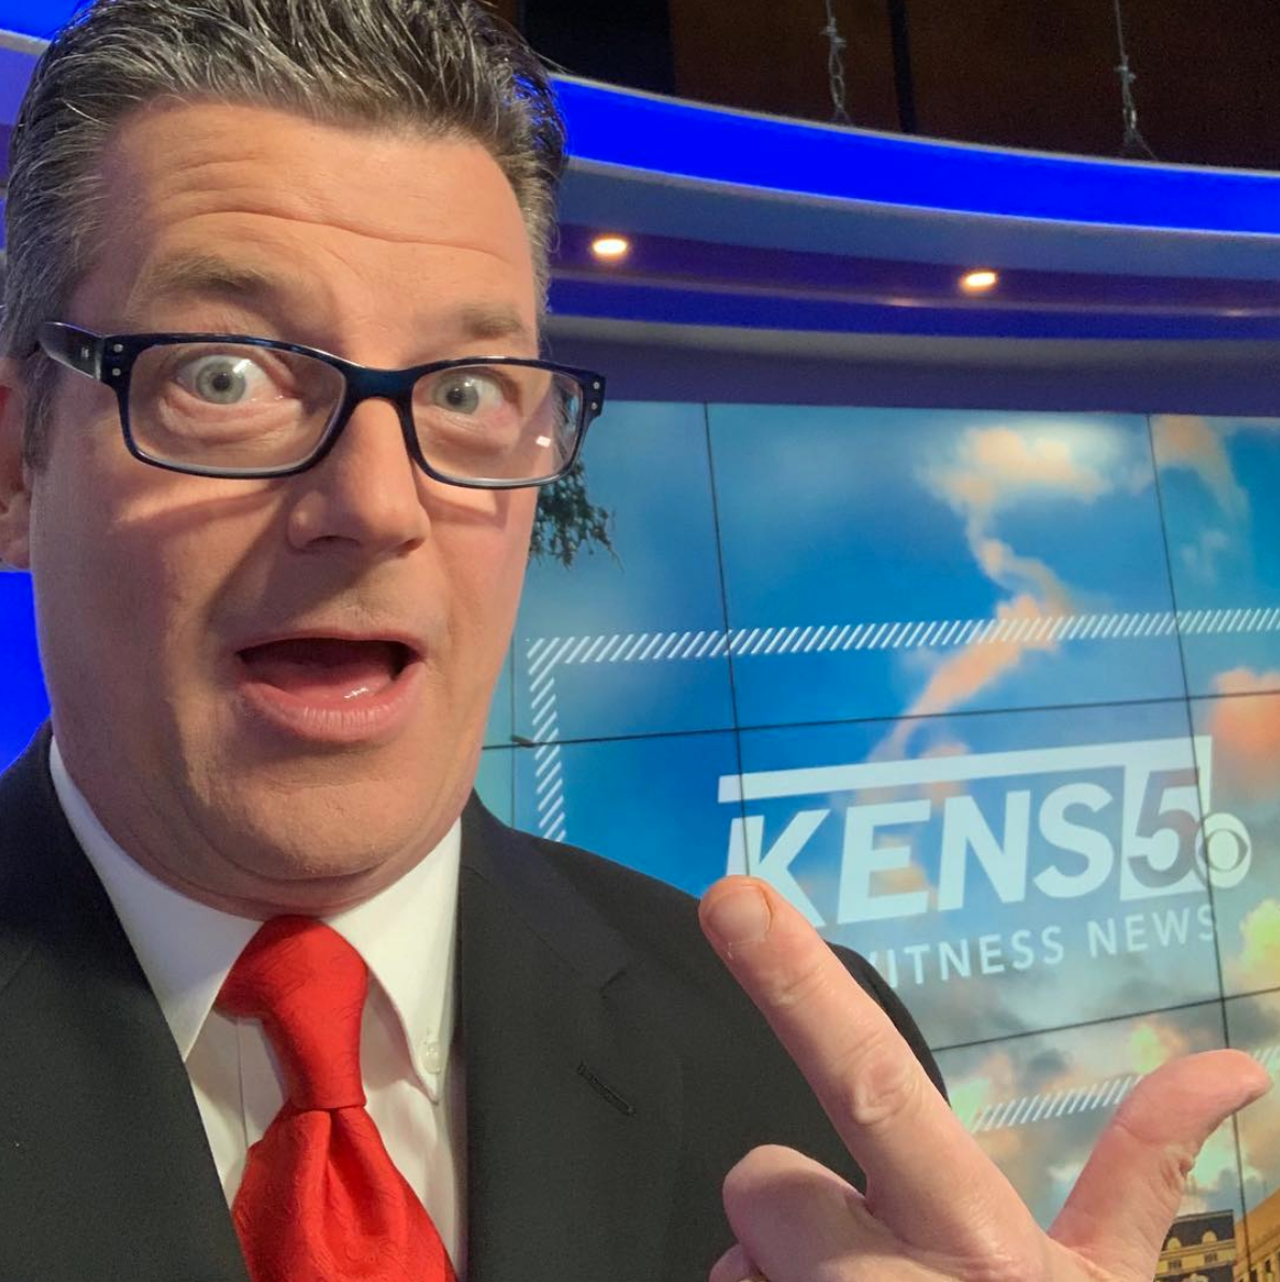 Bill Taylor
Love the weather? Love KENS 5? Then you likely love Bill Taylor? He’s part of the weekday newscasts all afternoon and evening, so he stays busy letting you know what the weather sitch is in the Alamo City. He’s been doing so since 1996, so you know he stays loyal to SA.
Photo via Instagram / billtaylorkens